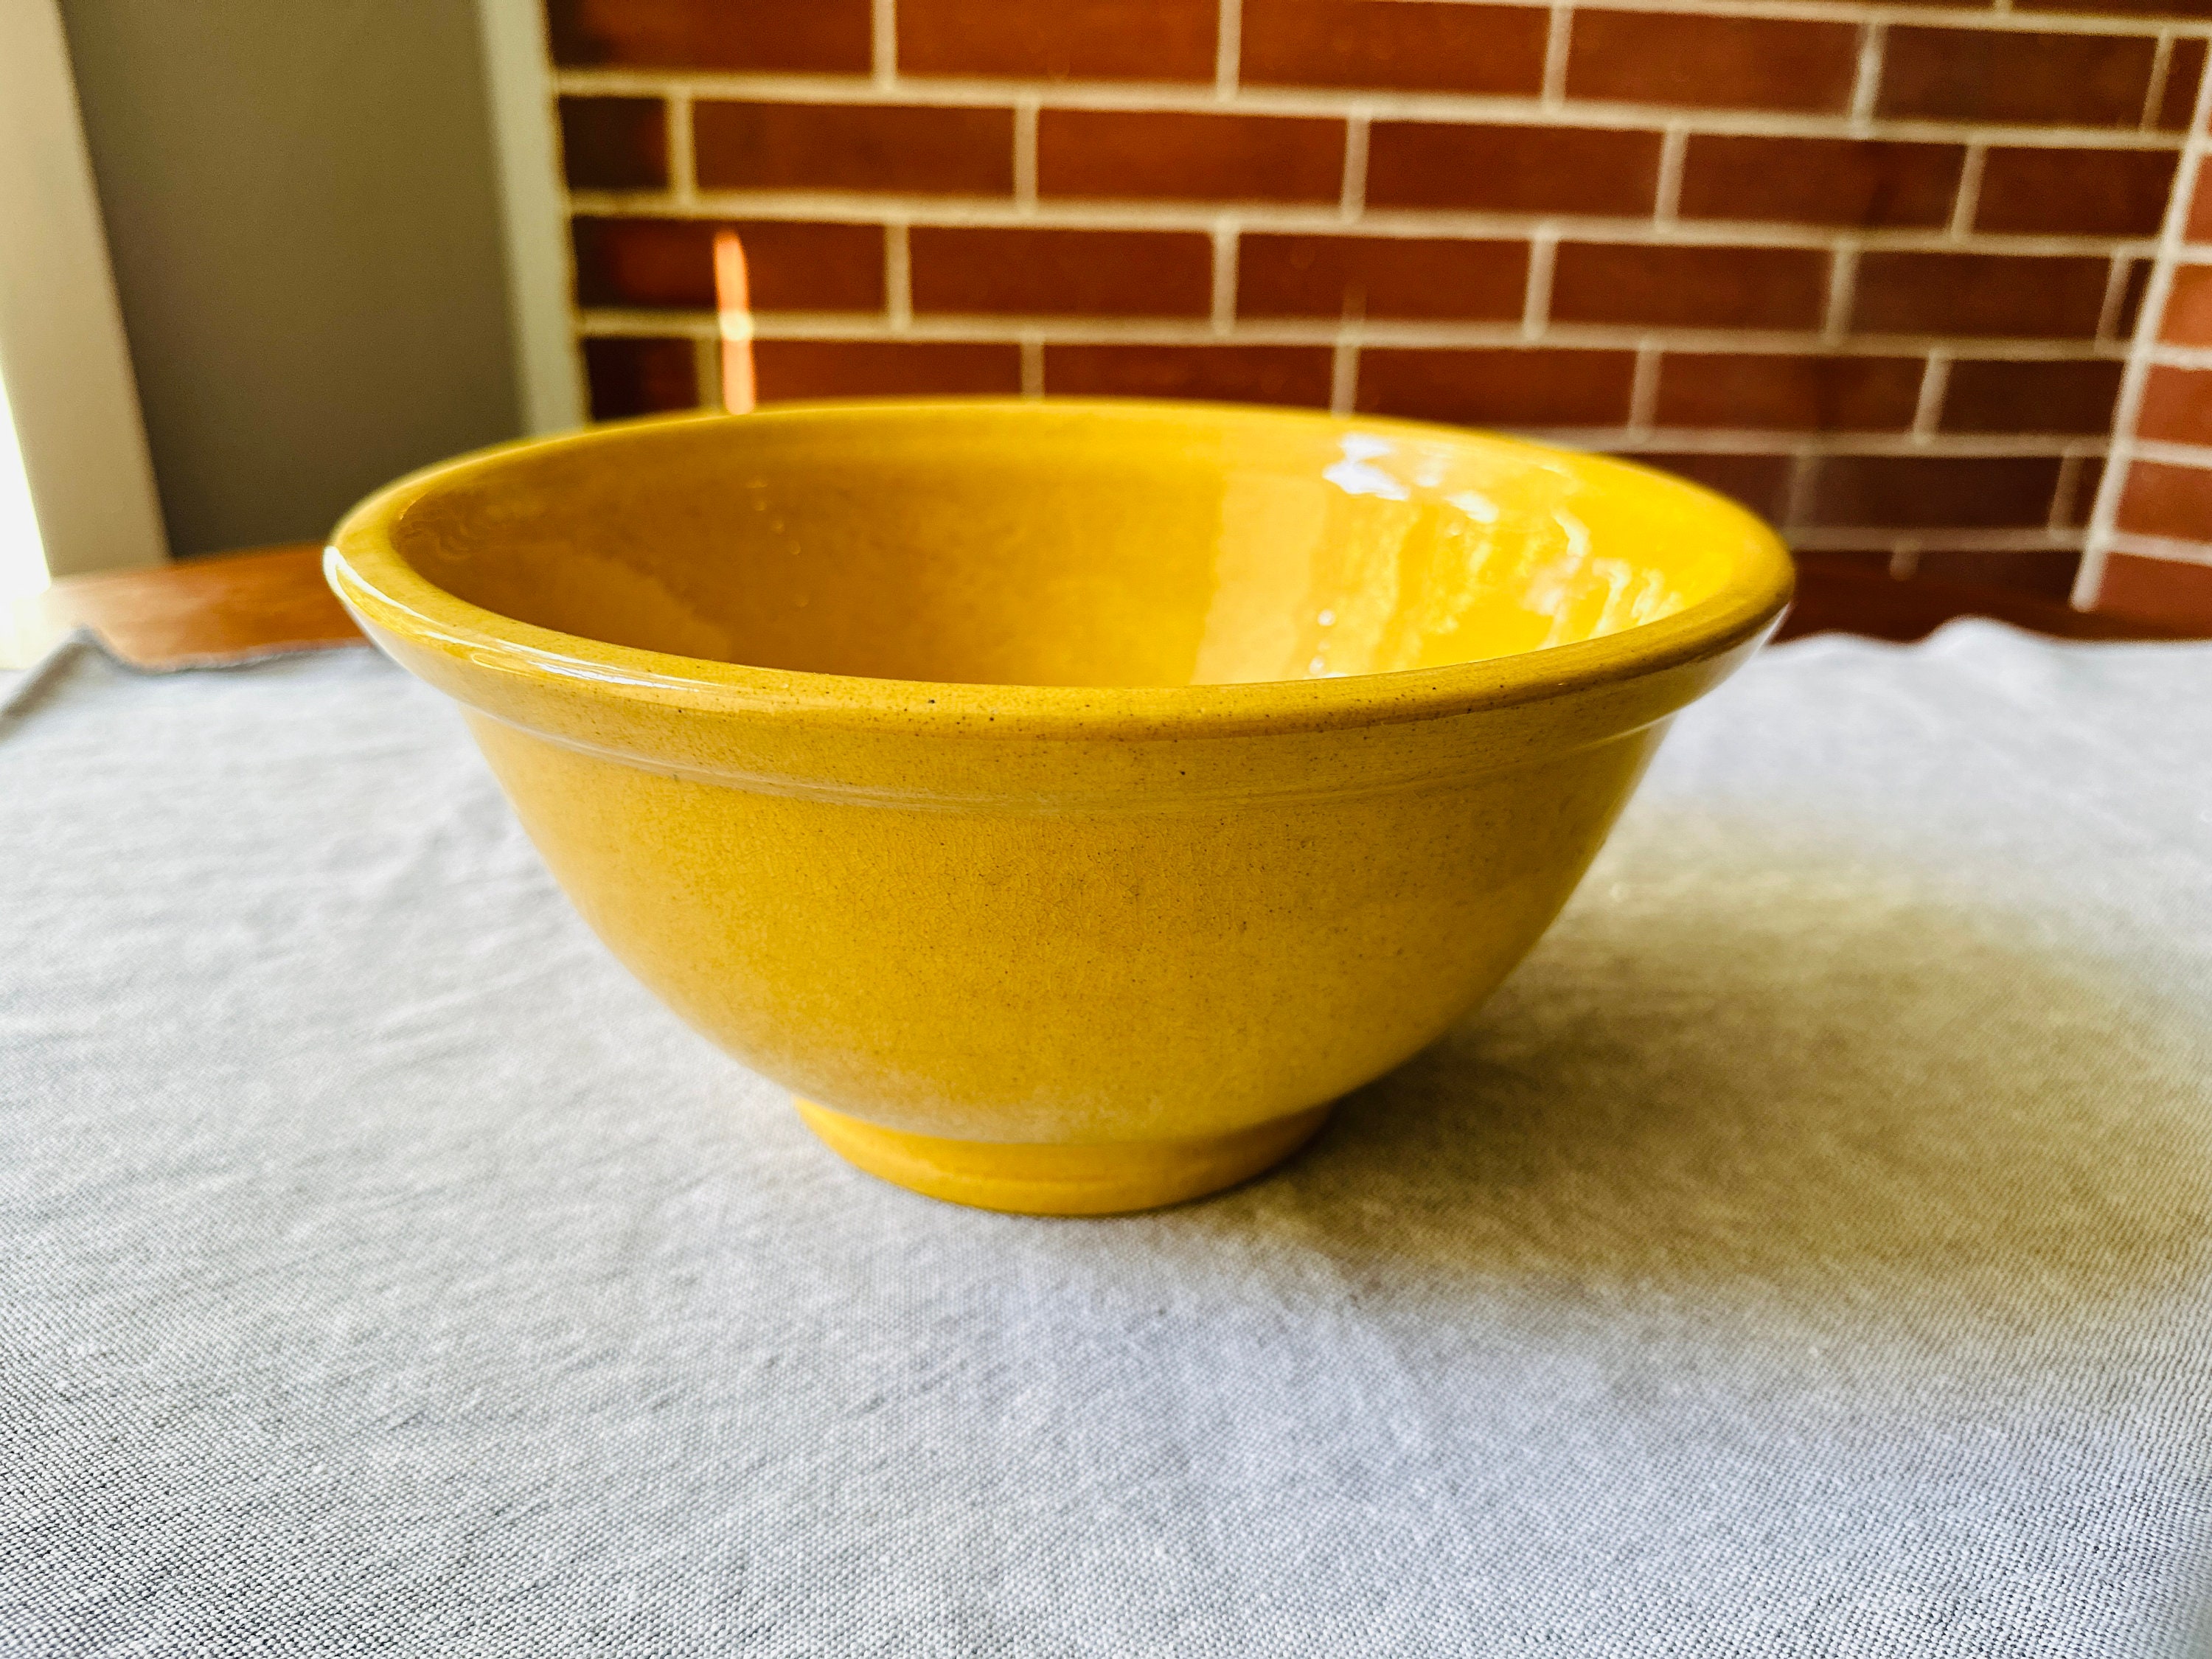 RUBBERMAID MIXING BOWL 2661 6 Cup Yellow Measuring Cup Vintage Chef  Culinary Baking Cookbook Cook Book Cooking Kitchen Mod Mid Century 29 